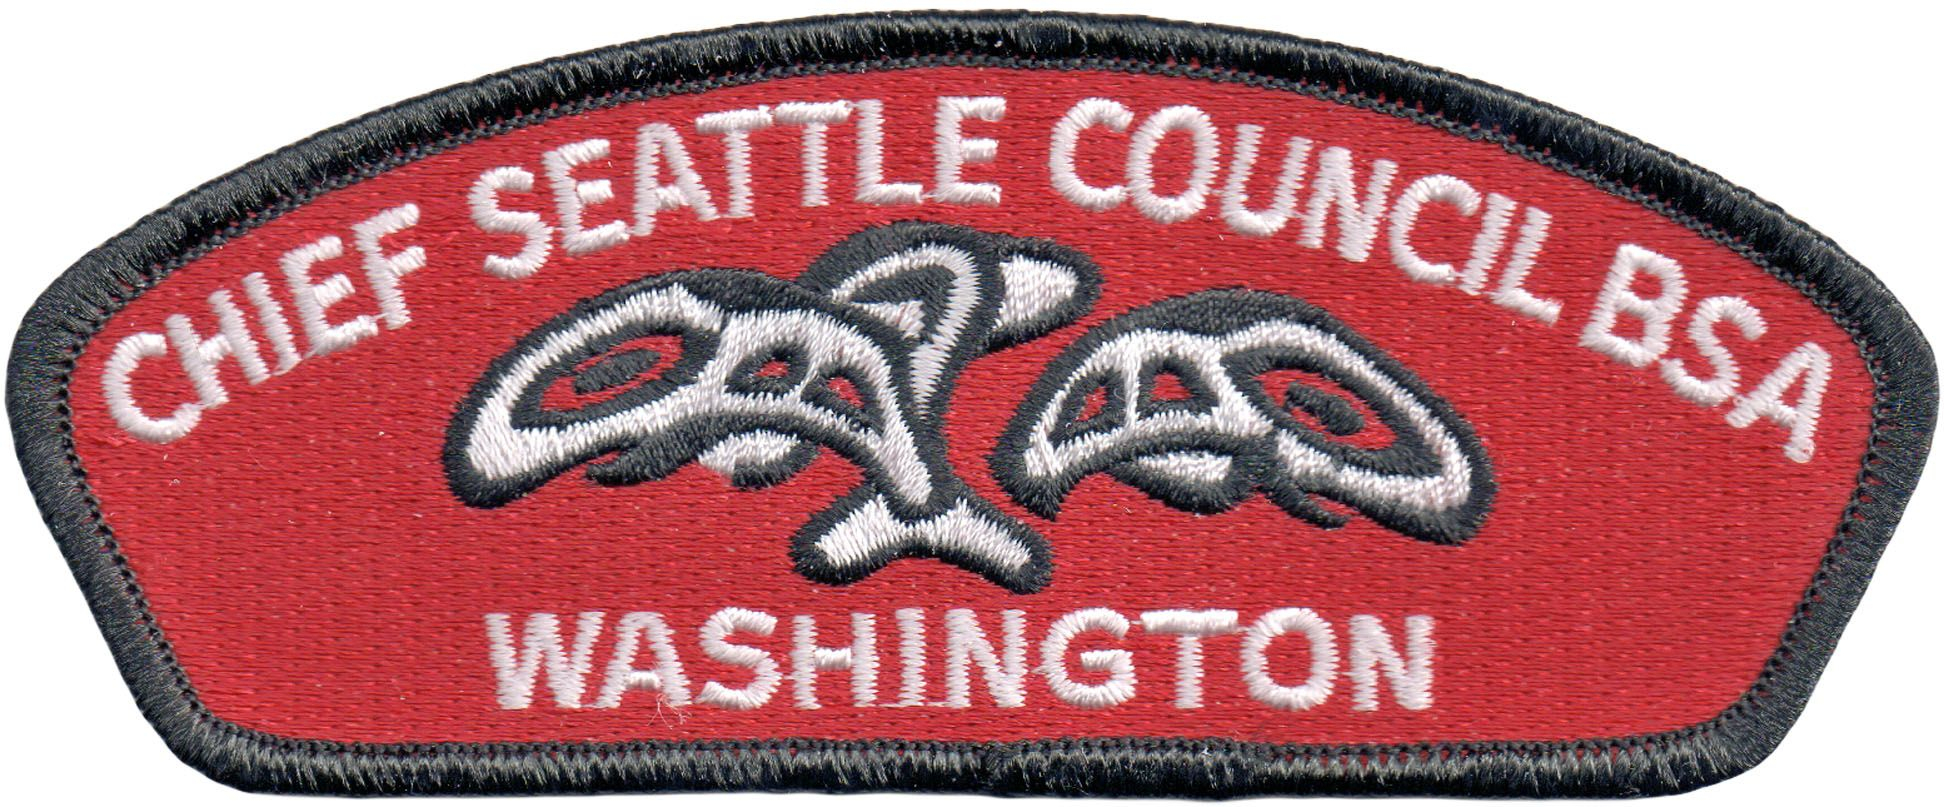 Cascade District 2013 Camporee patch Chief Seattle Council 